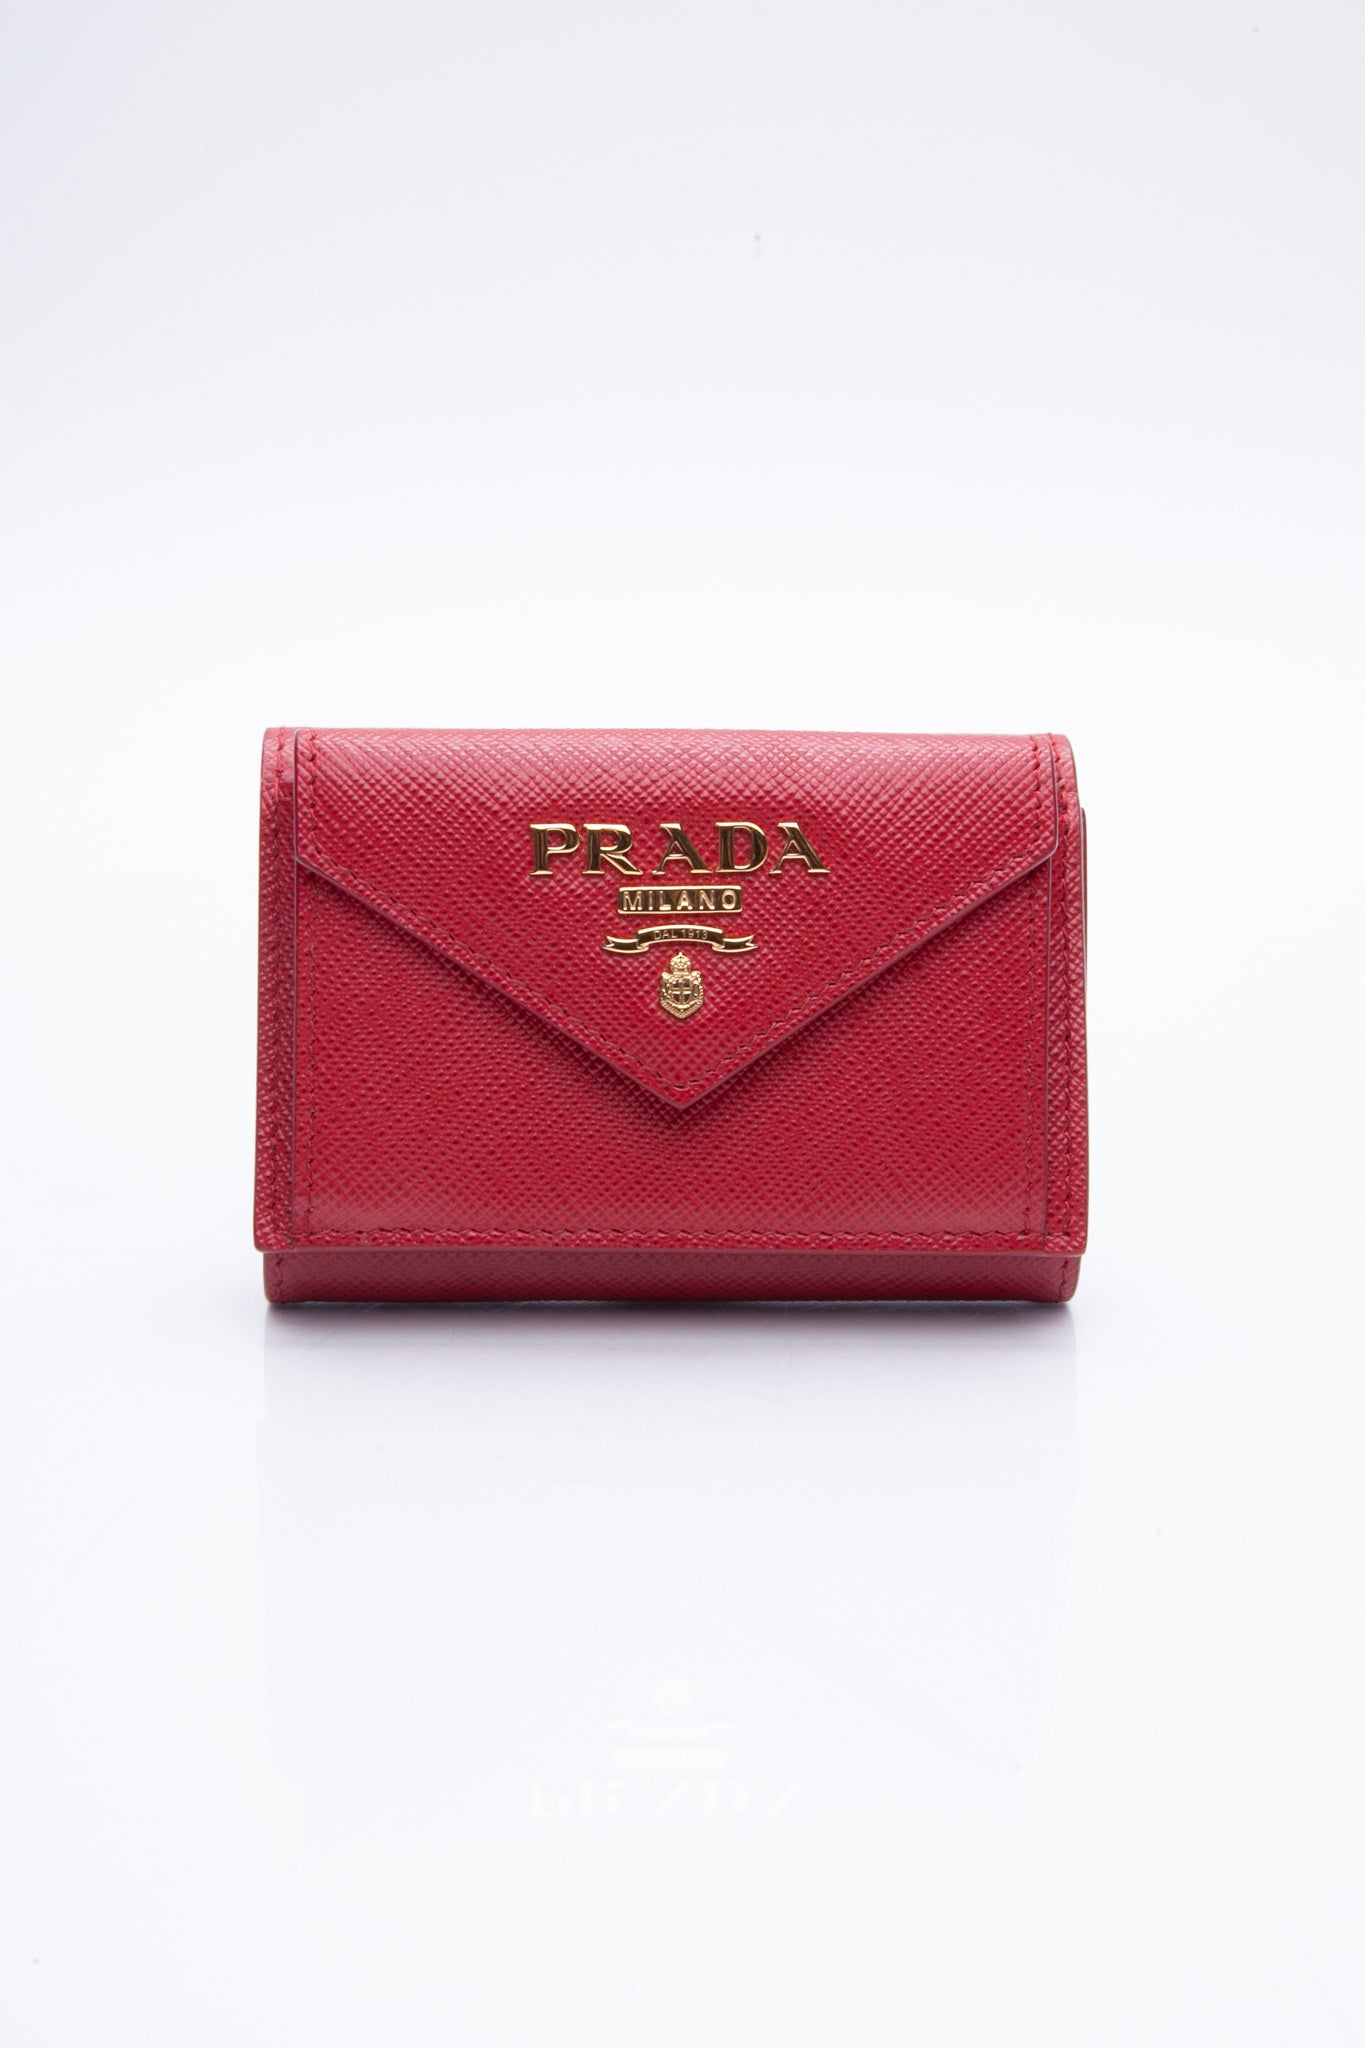 Chanel Bicolore Red Leather Coin Wallet